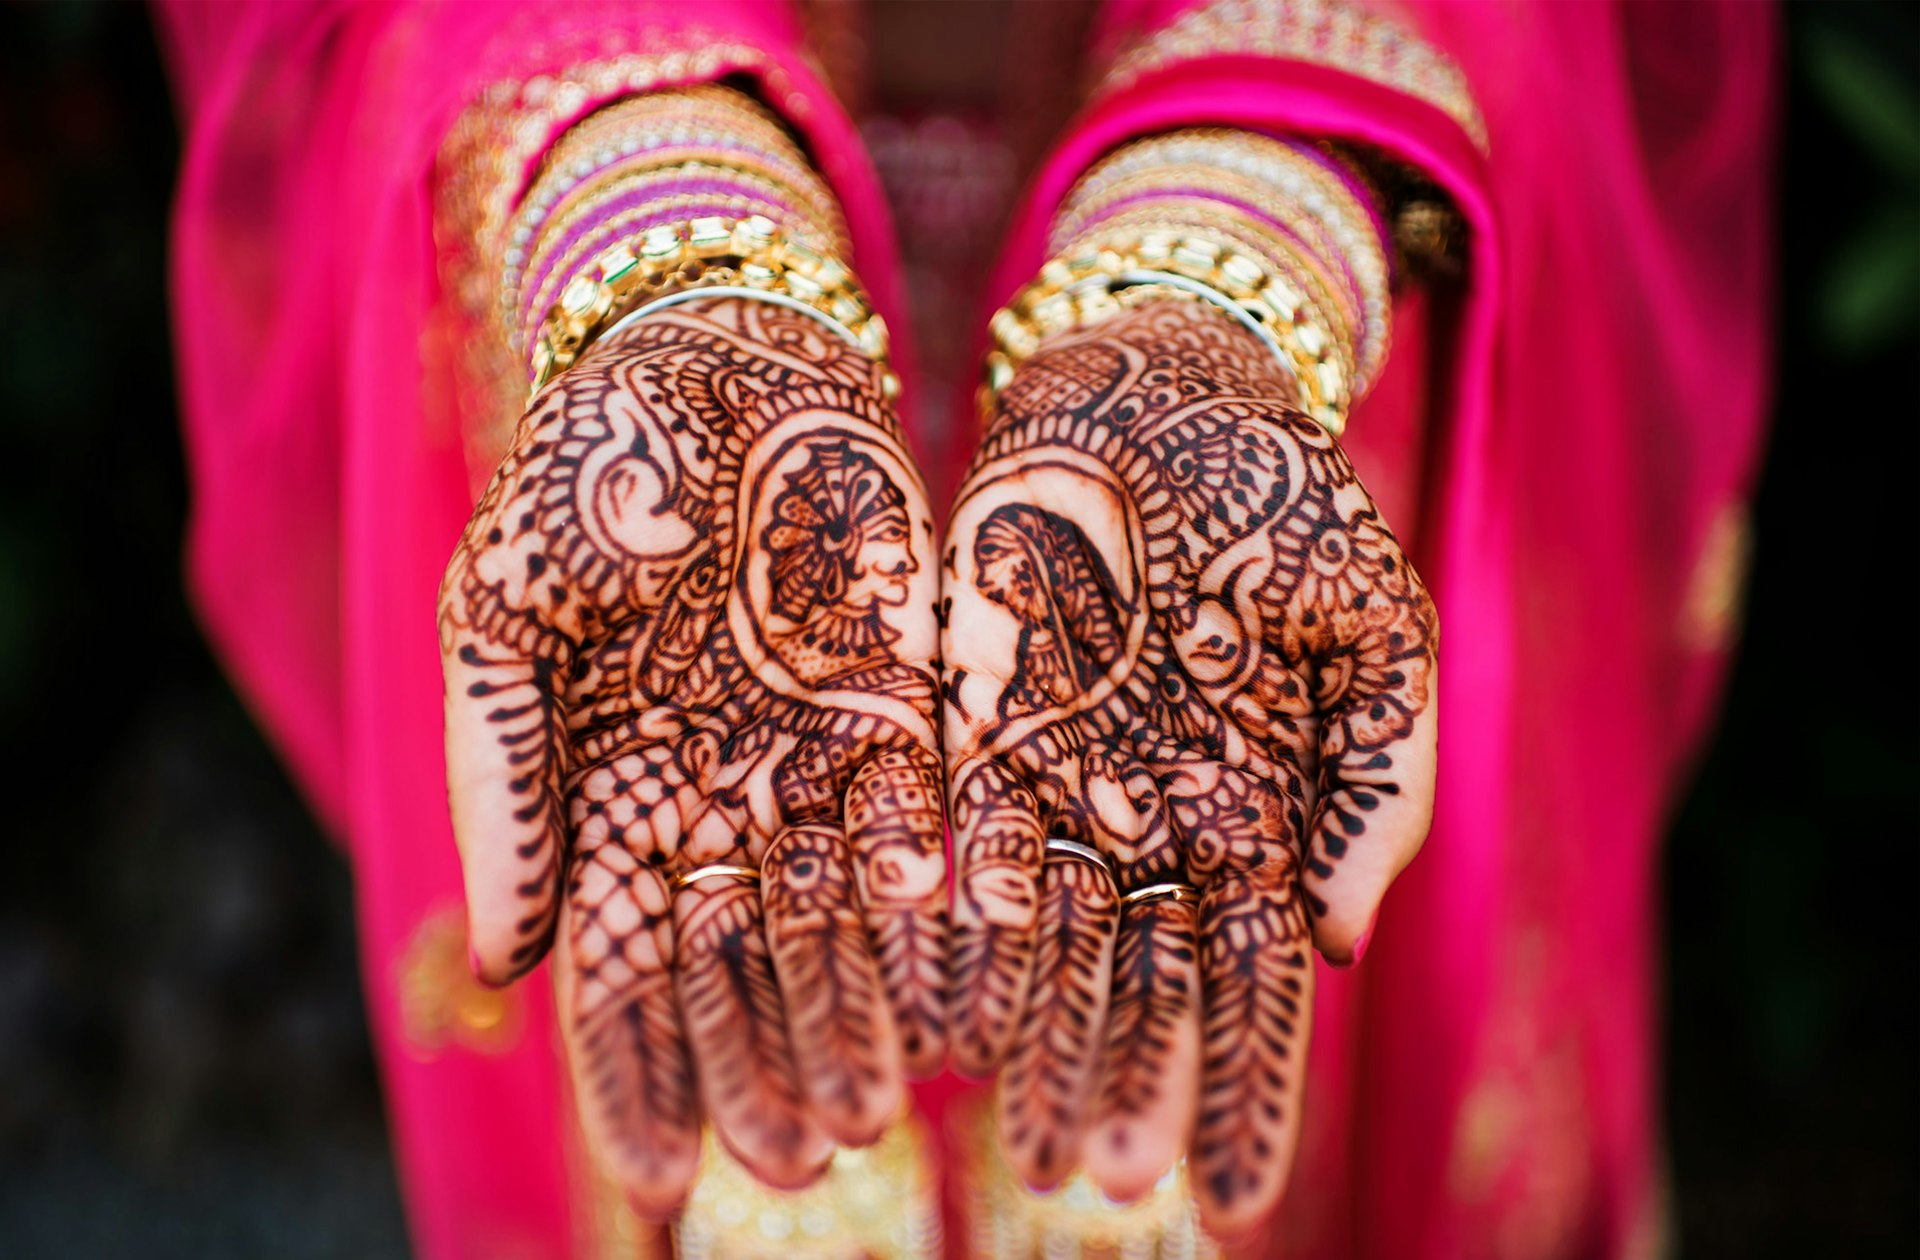 A bride in a bright pink sari shows off her henna designs on her hands